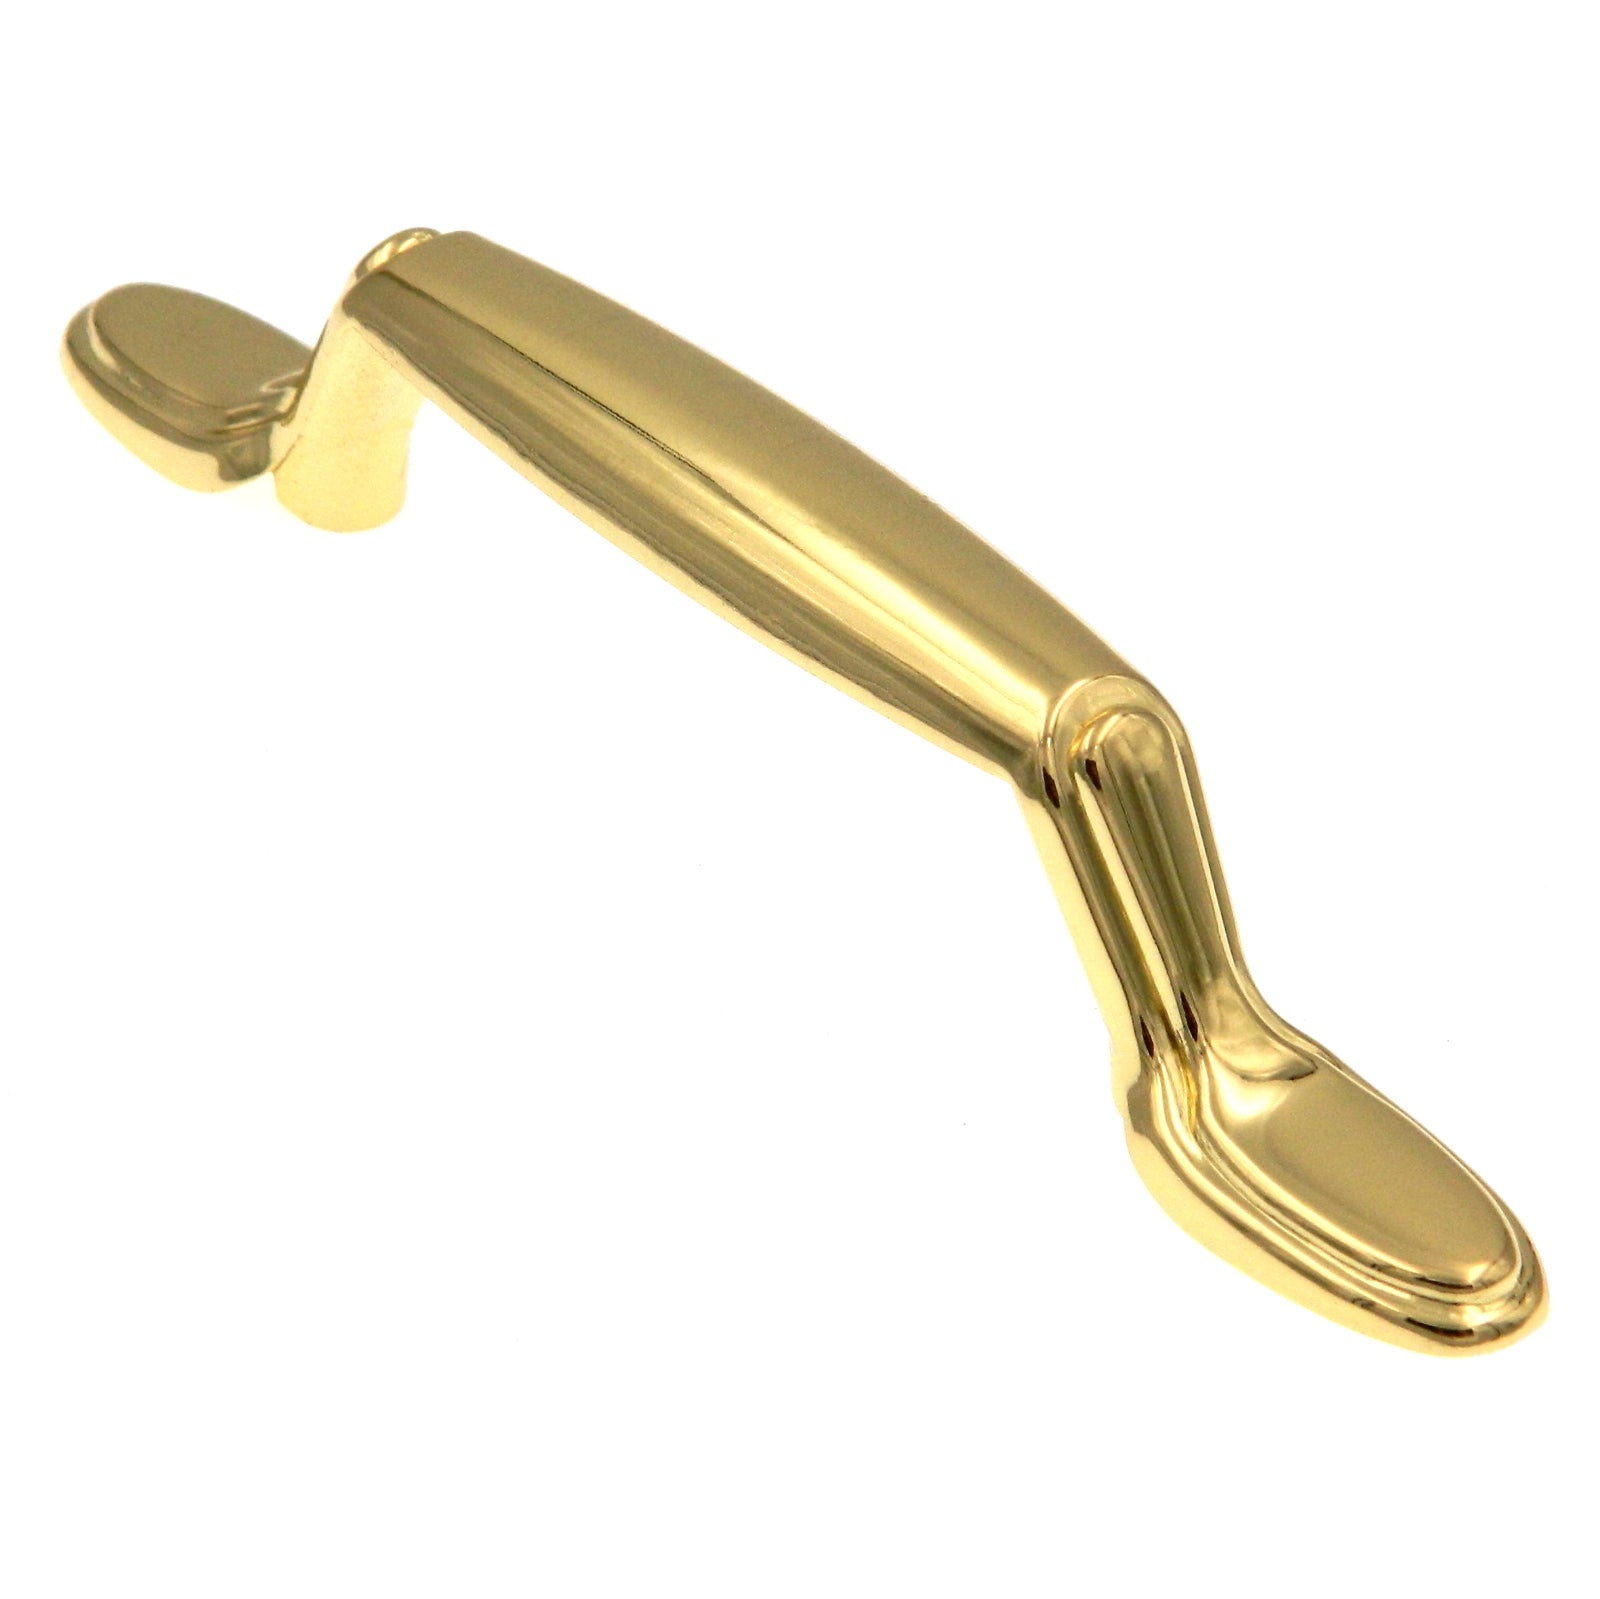 10 Pack Amerock Allison 254PB Polished Brass 3"cc Arch Cabinet Handle Pull